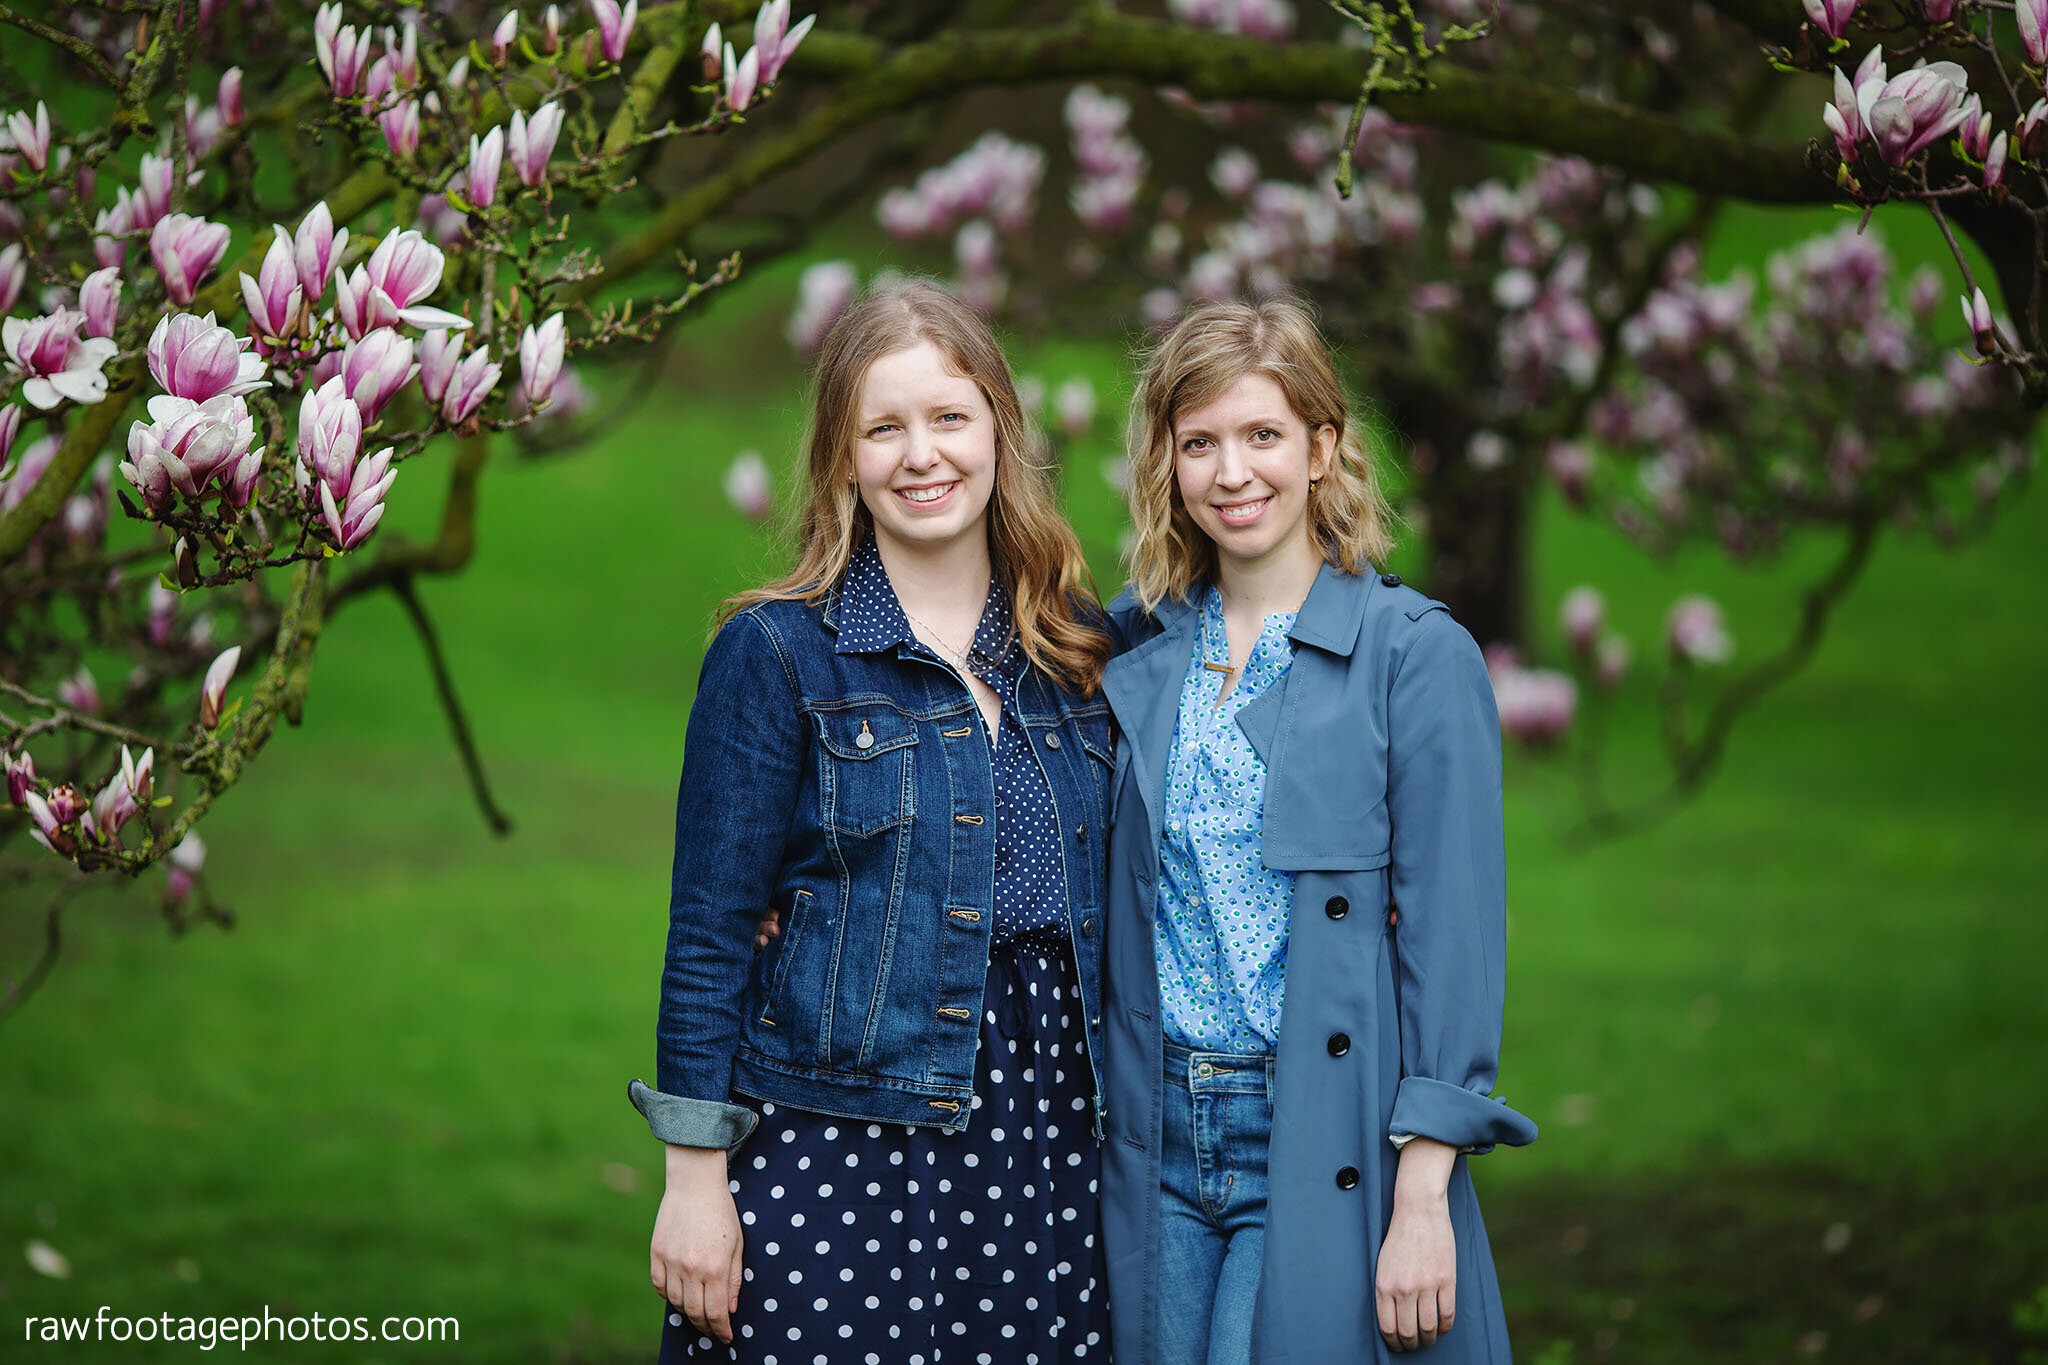 london_ontario_family_photographer-raw_footage_photography-spring_blossoms-extended_family_session-magnolia-blossoms_010.jpg